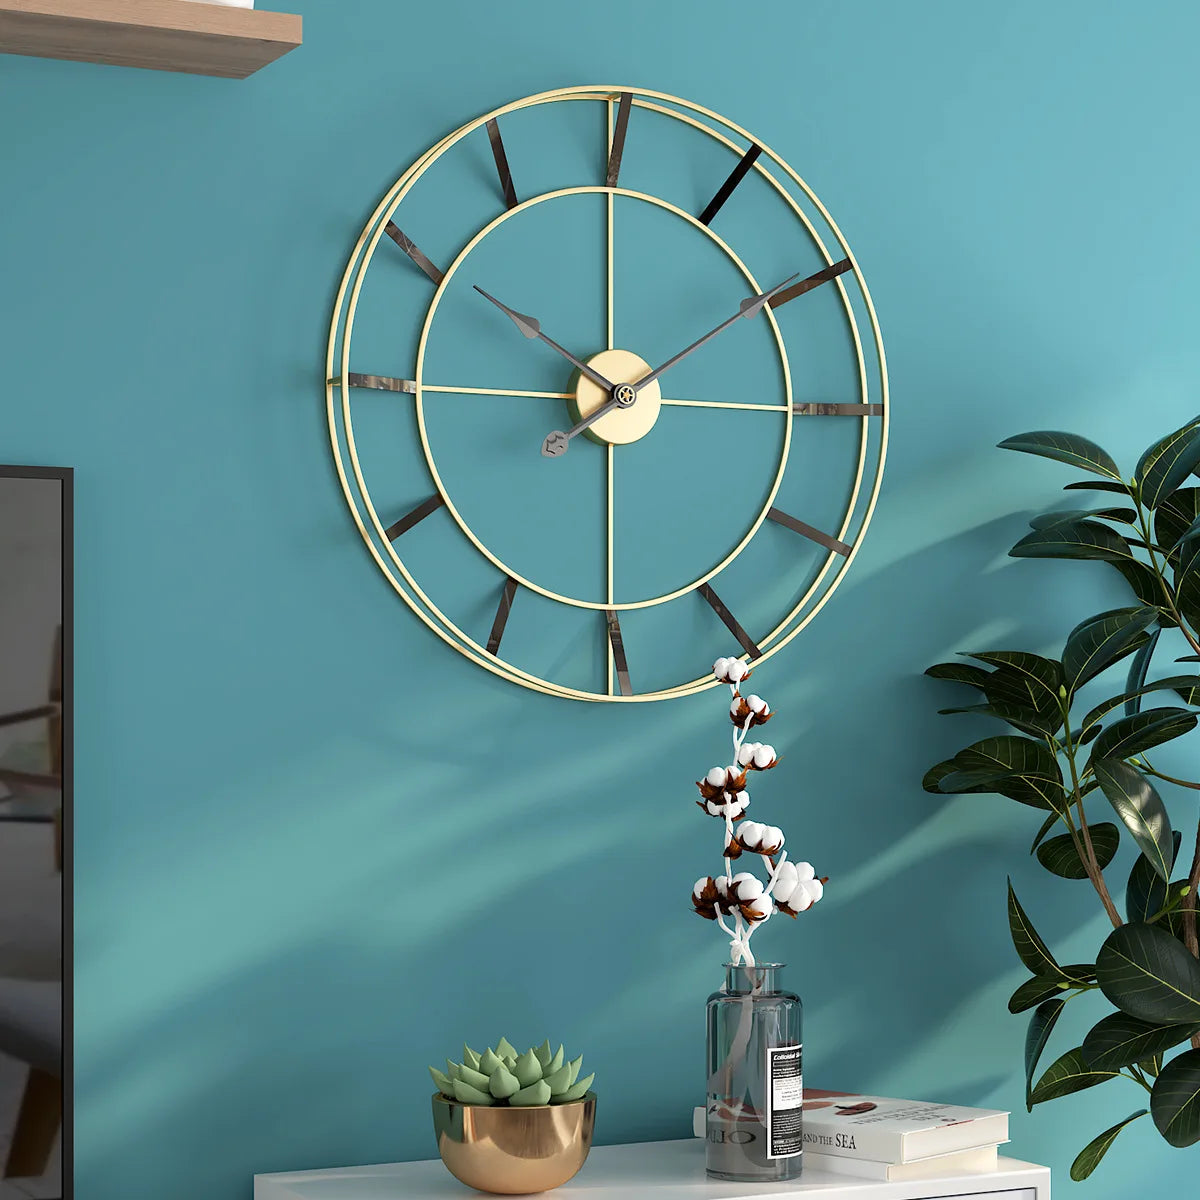 A modern geometric design wall clock with a minimalist design against a turquoise wall, above a small shelf with decorative items.